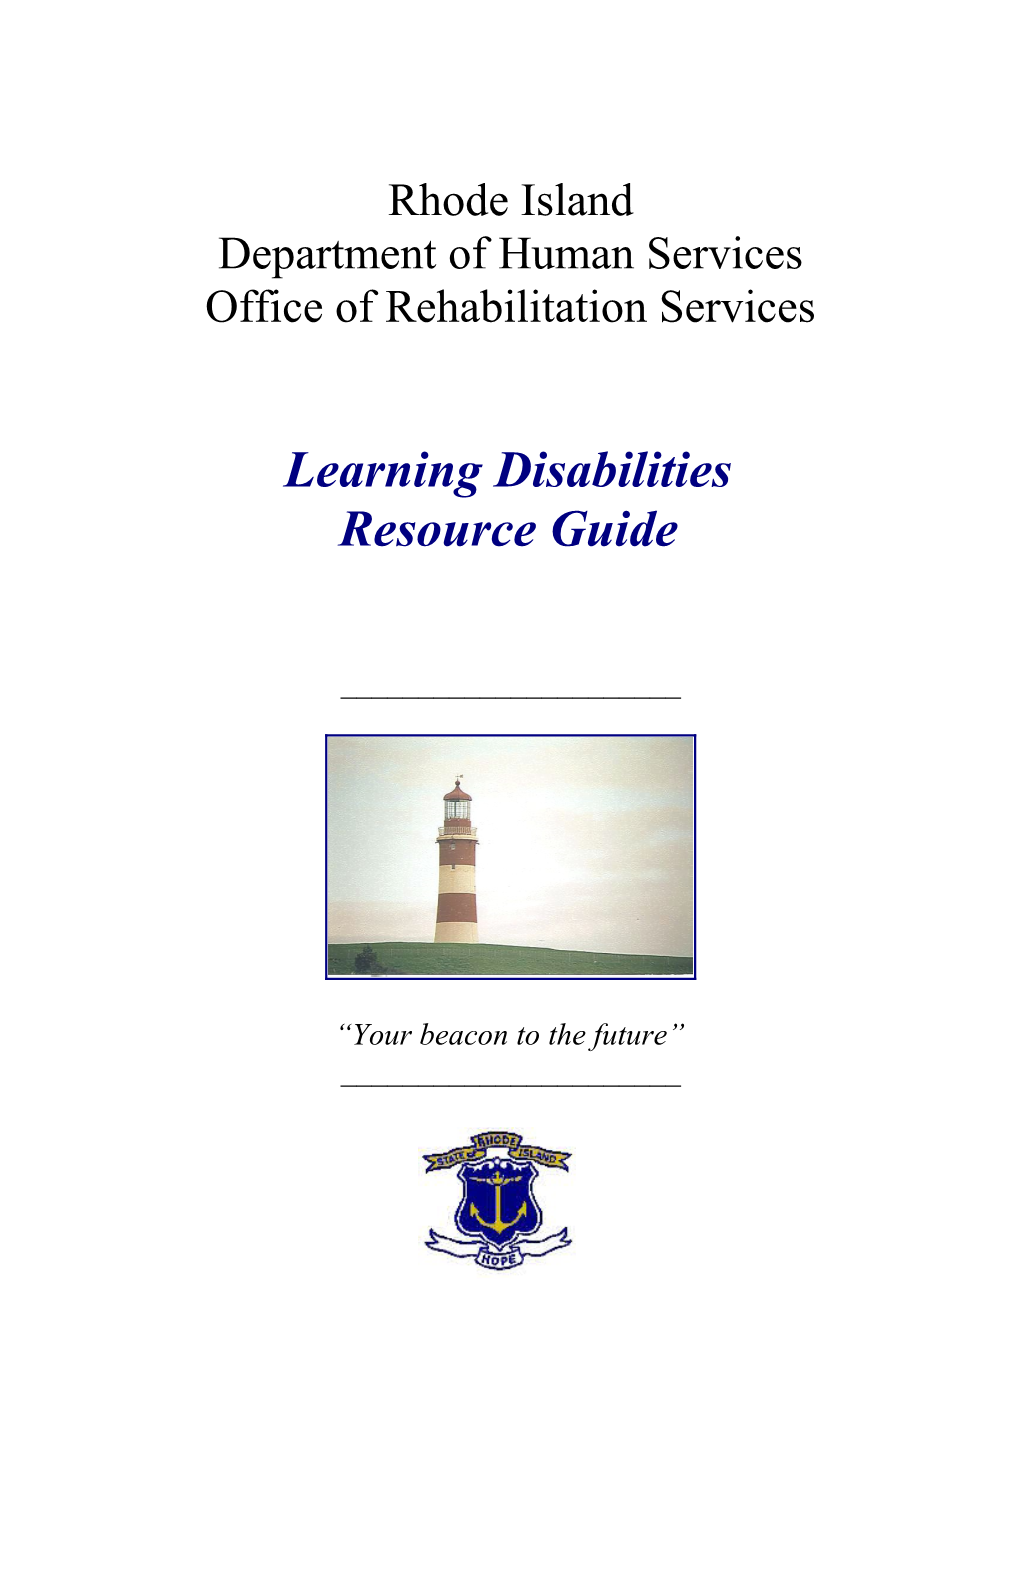 Learning Disabilities Resource Guide